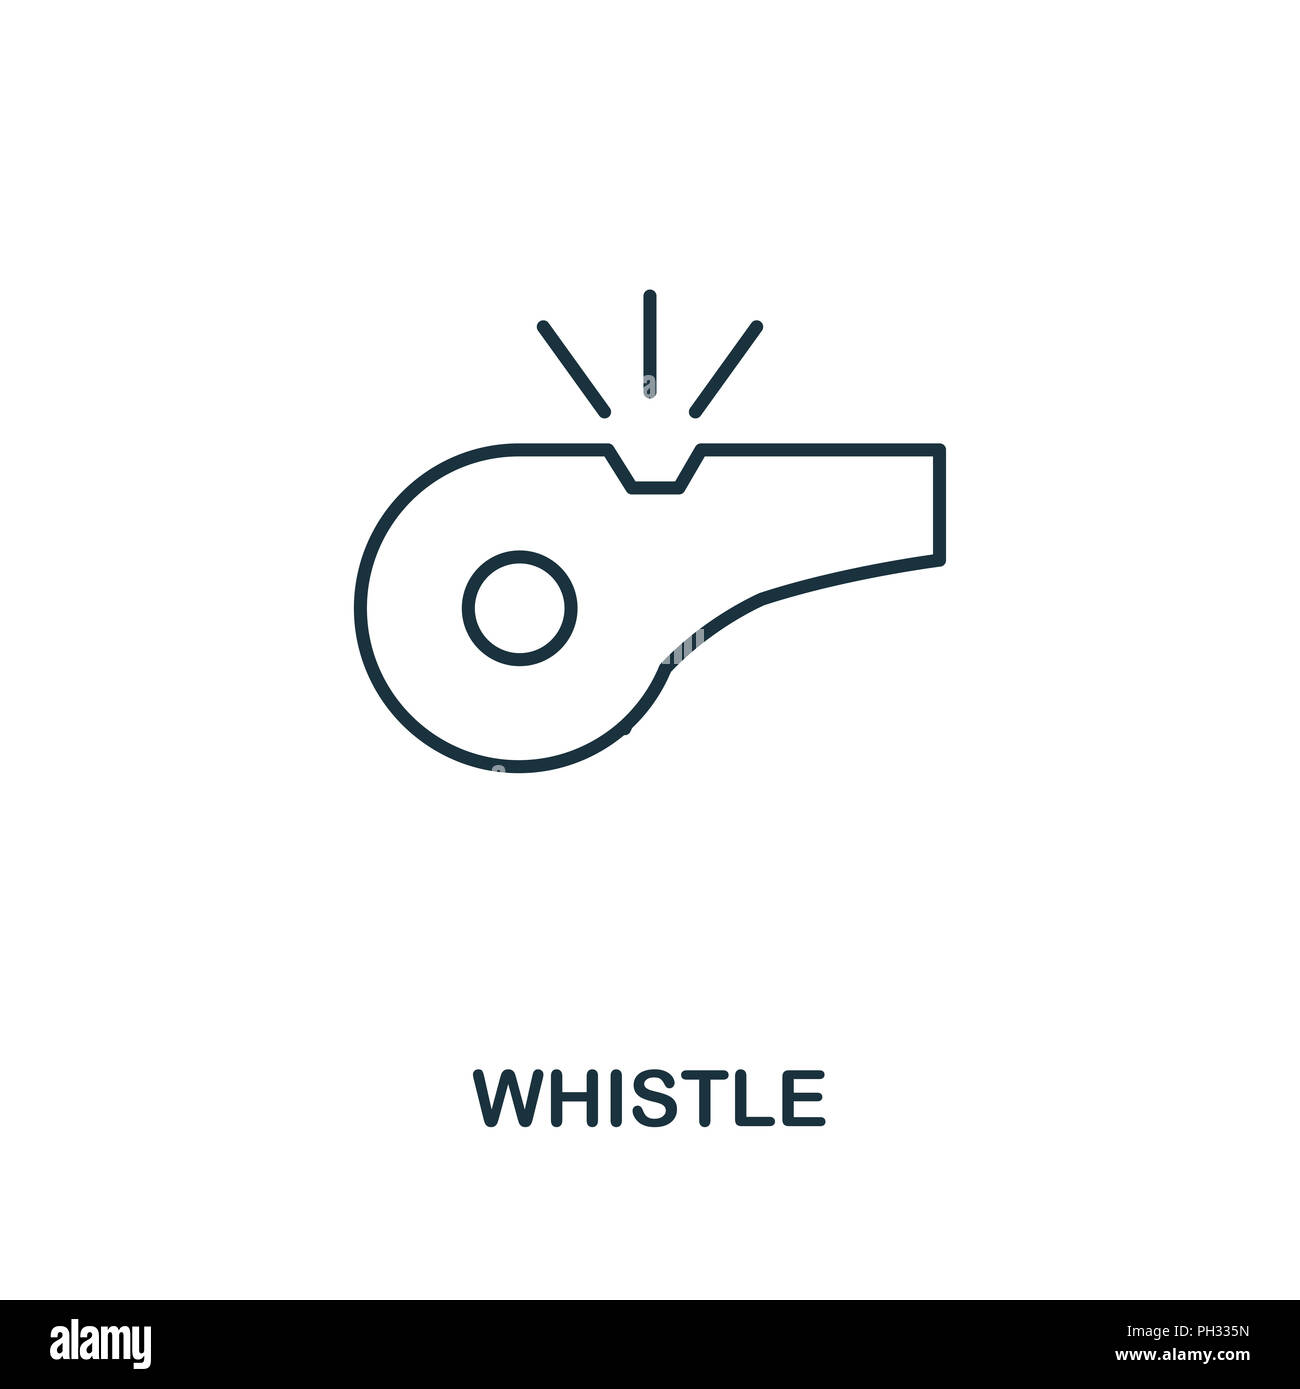 simple whistle